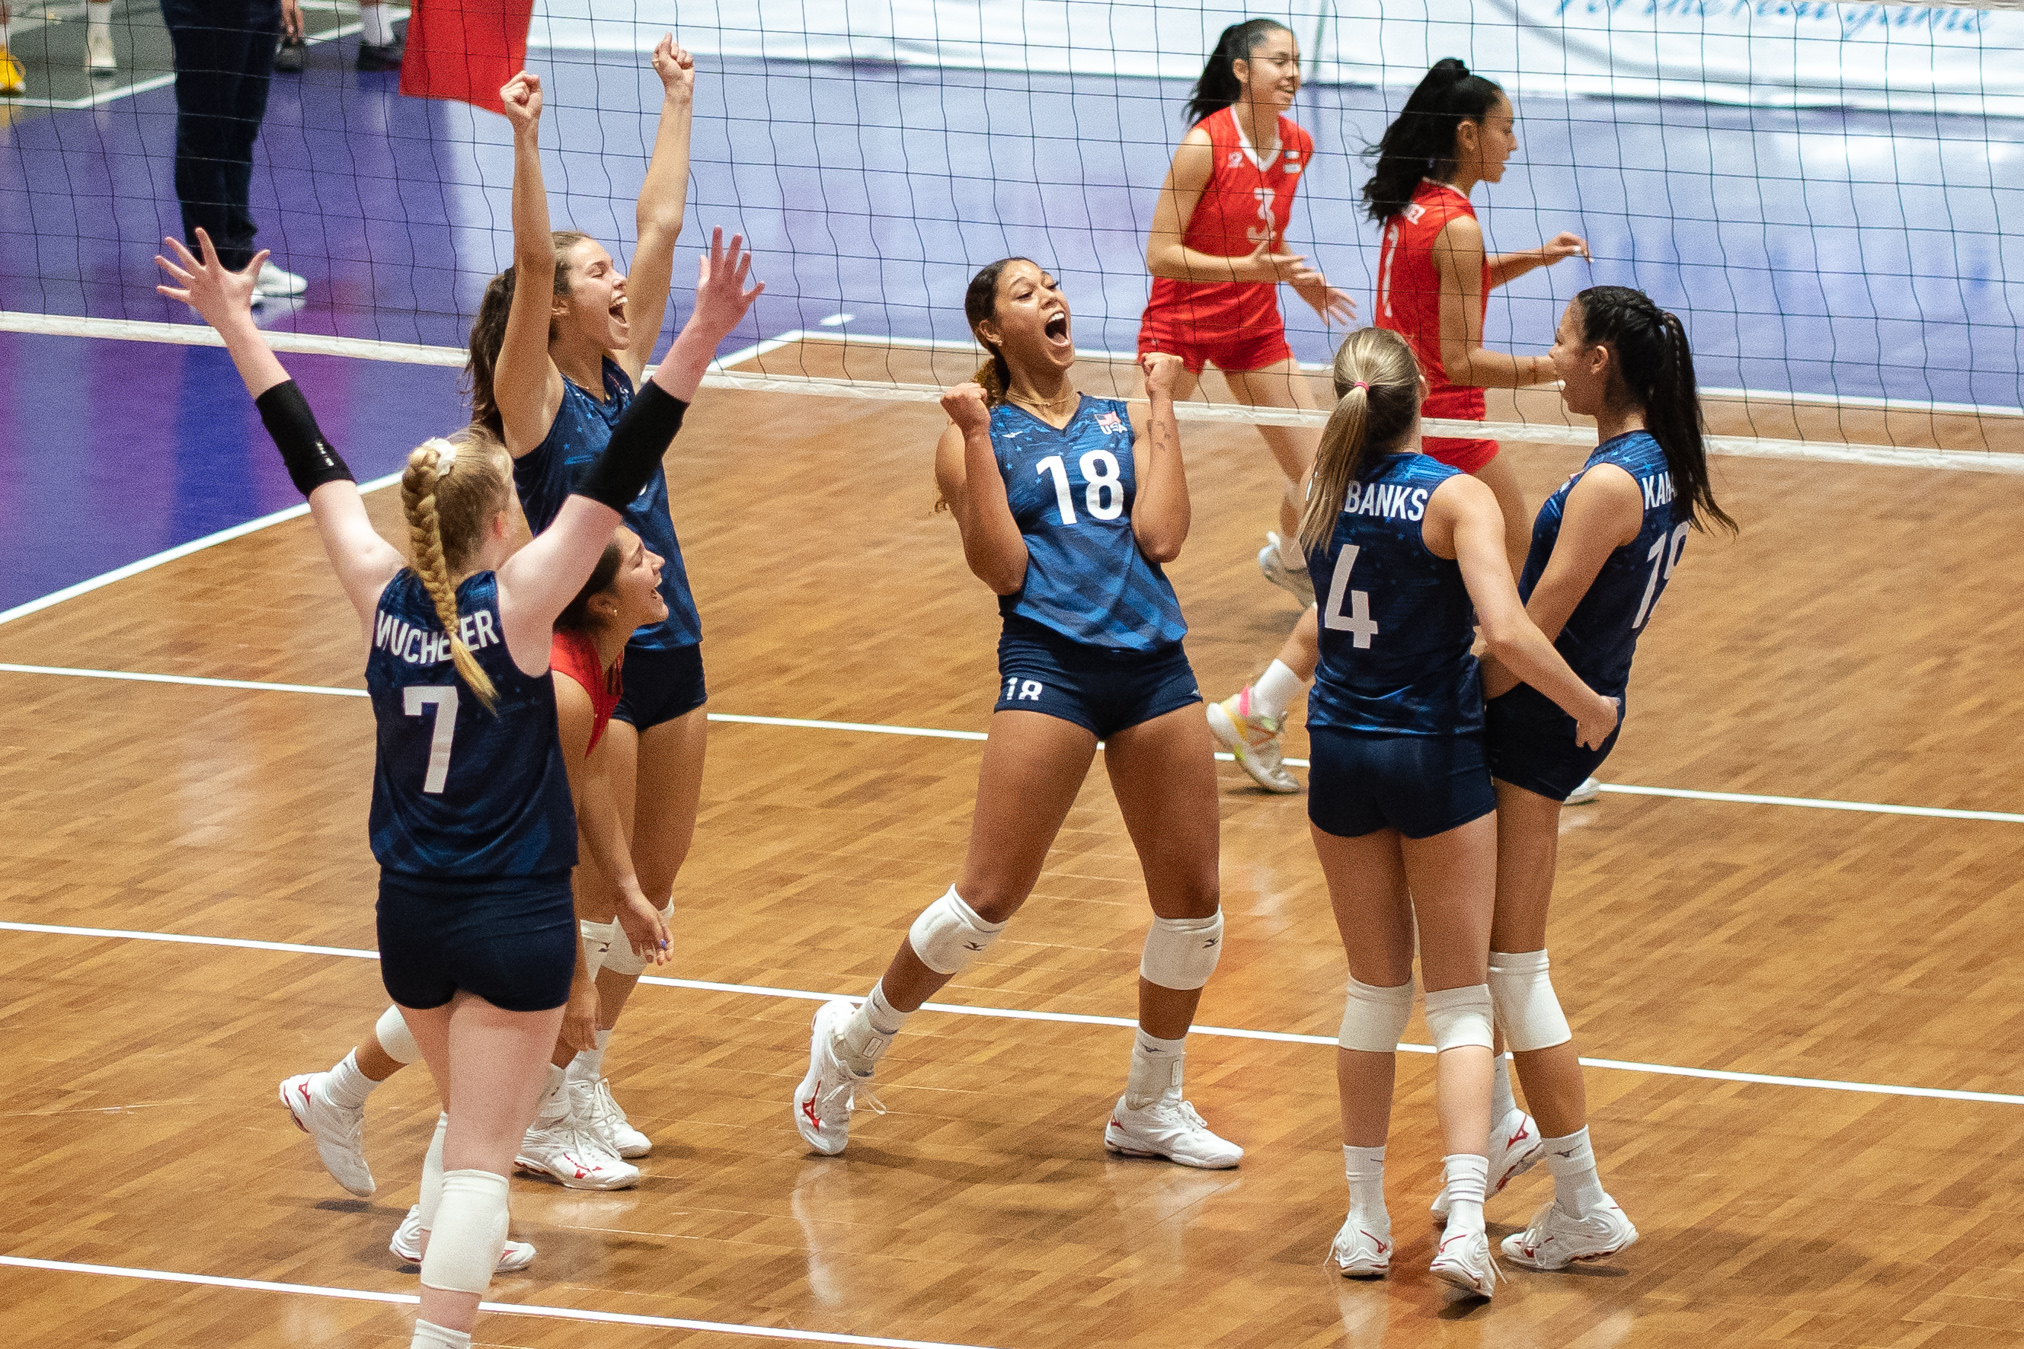 United States to play for Women’s U21 Pan American Cup title